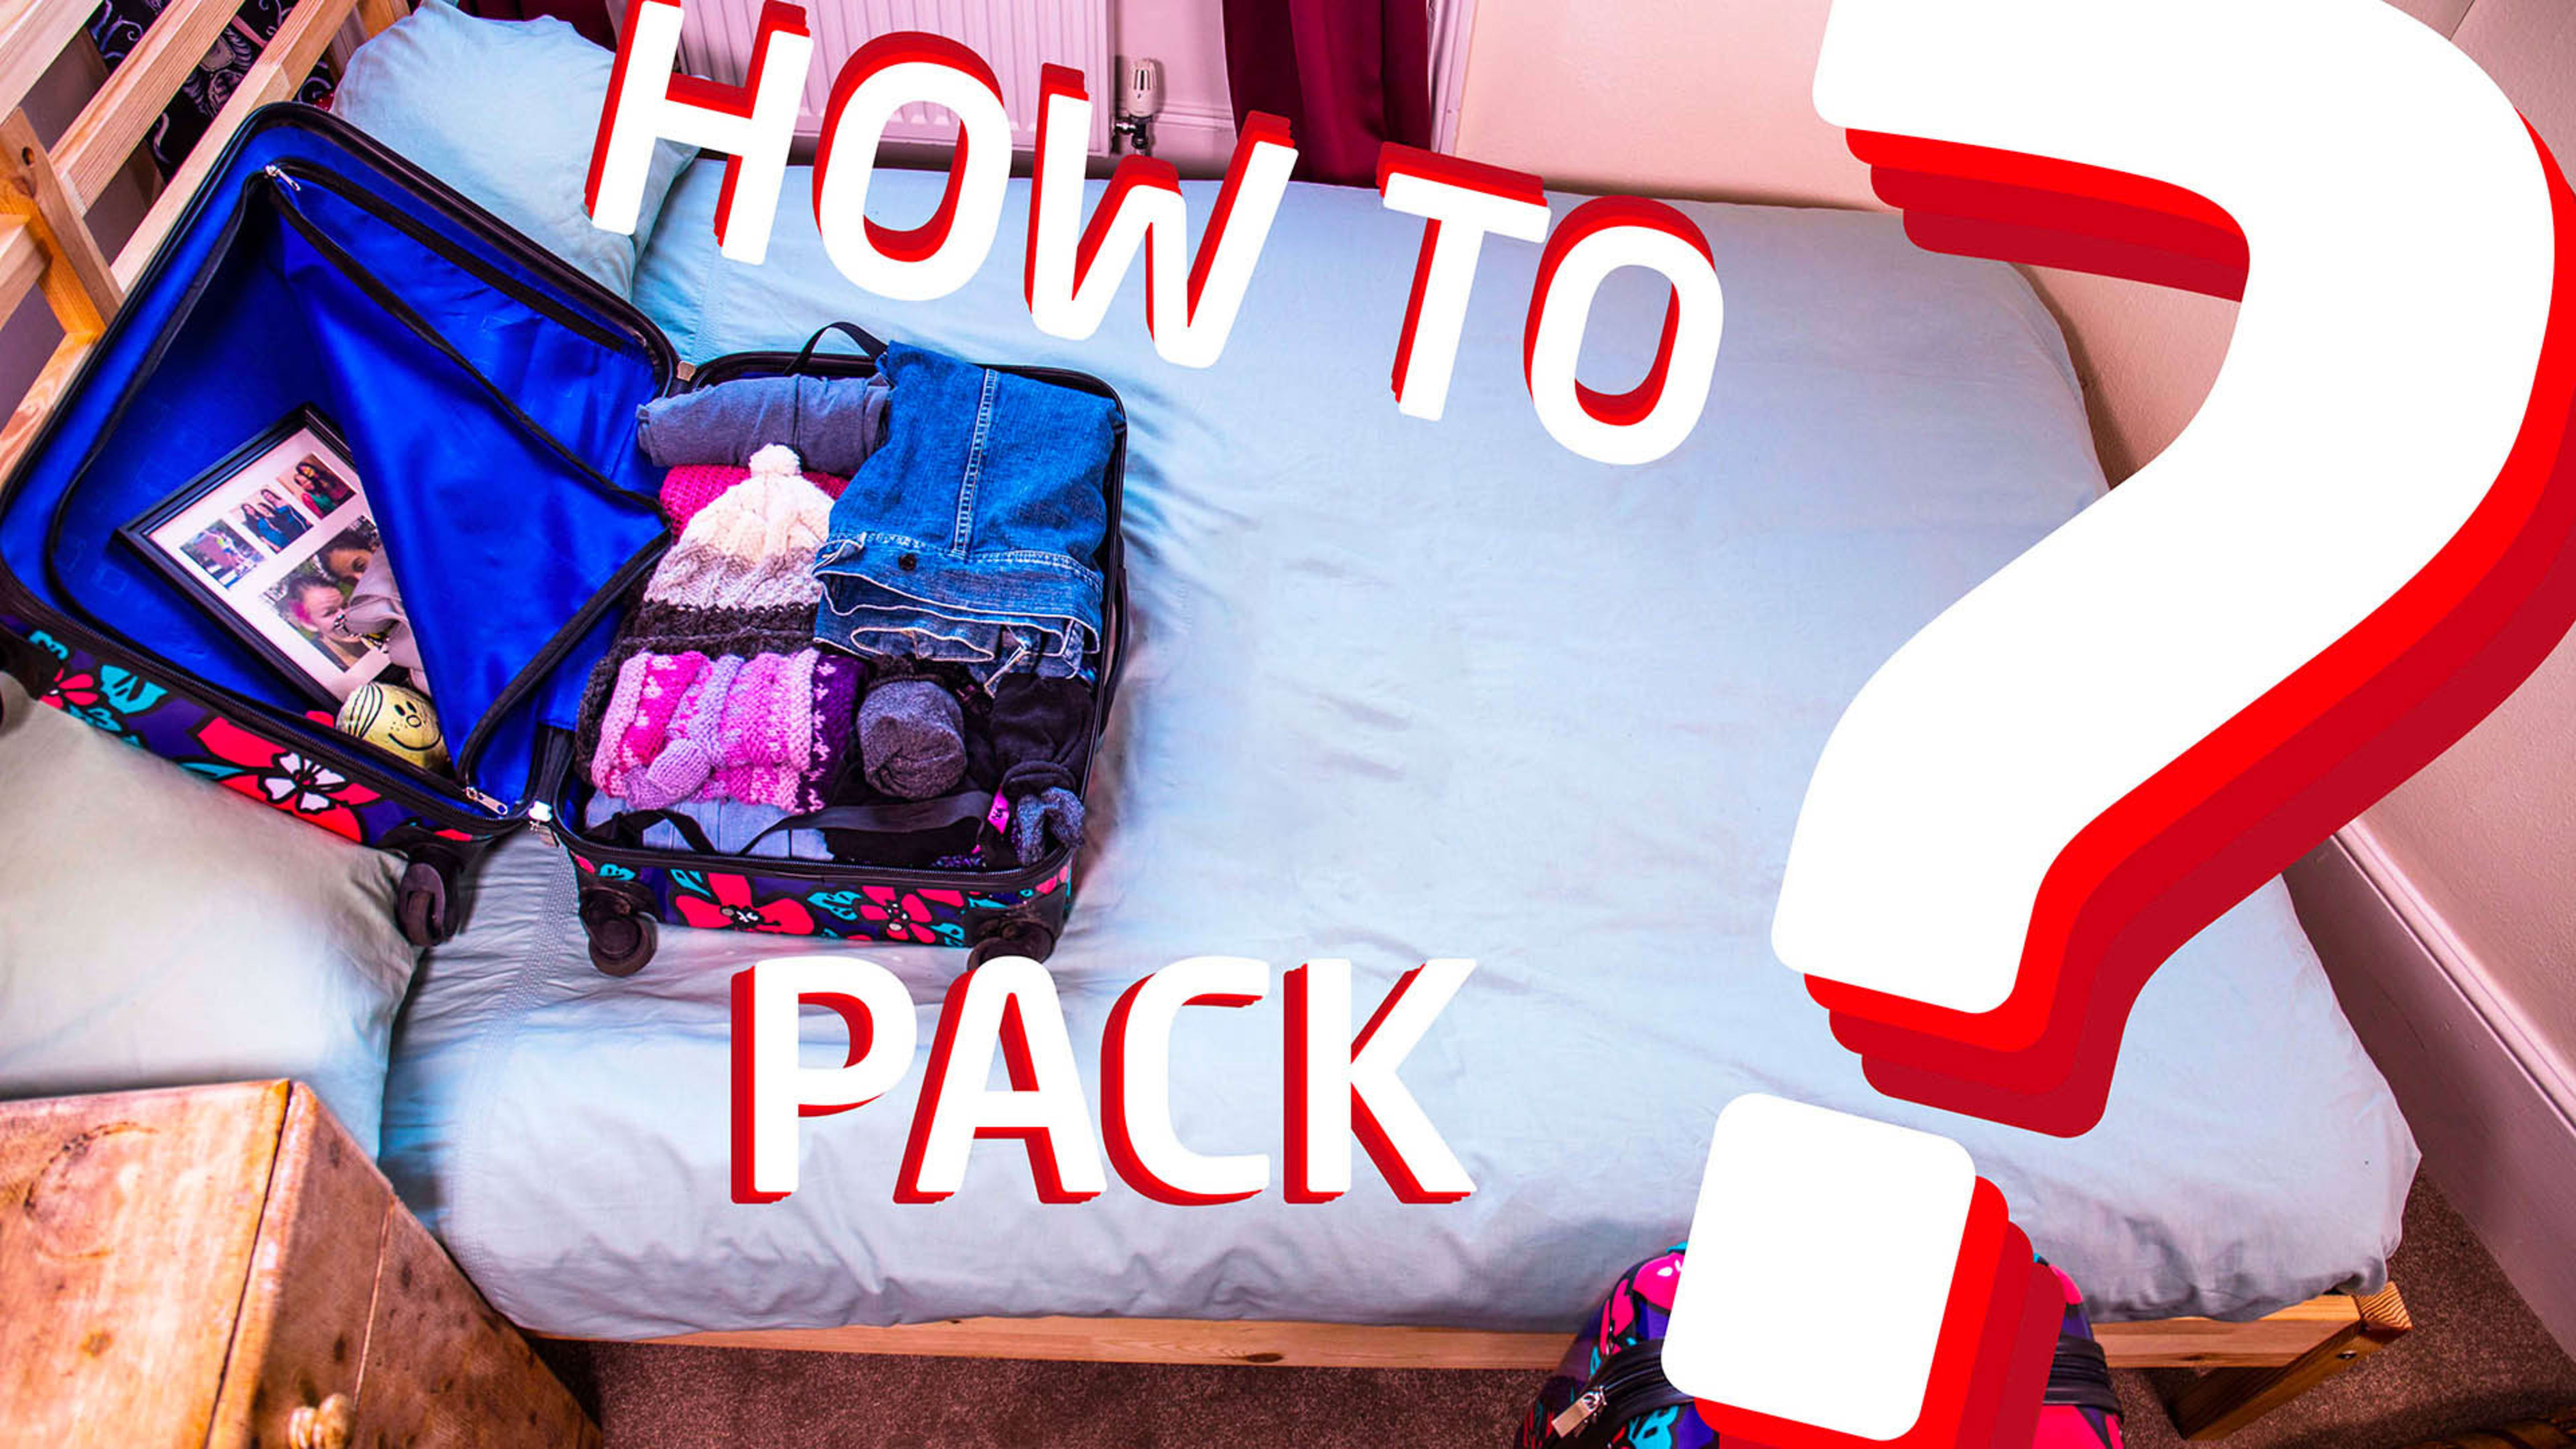 How to pack?